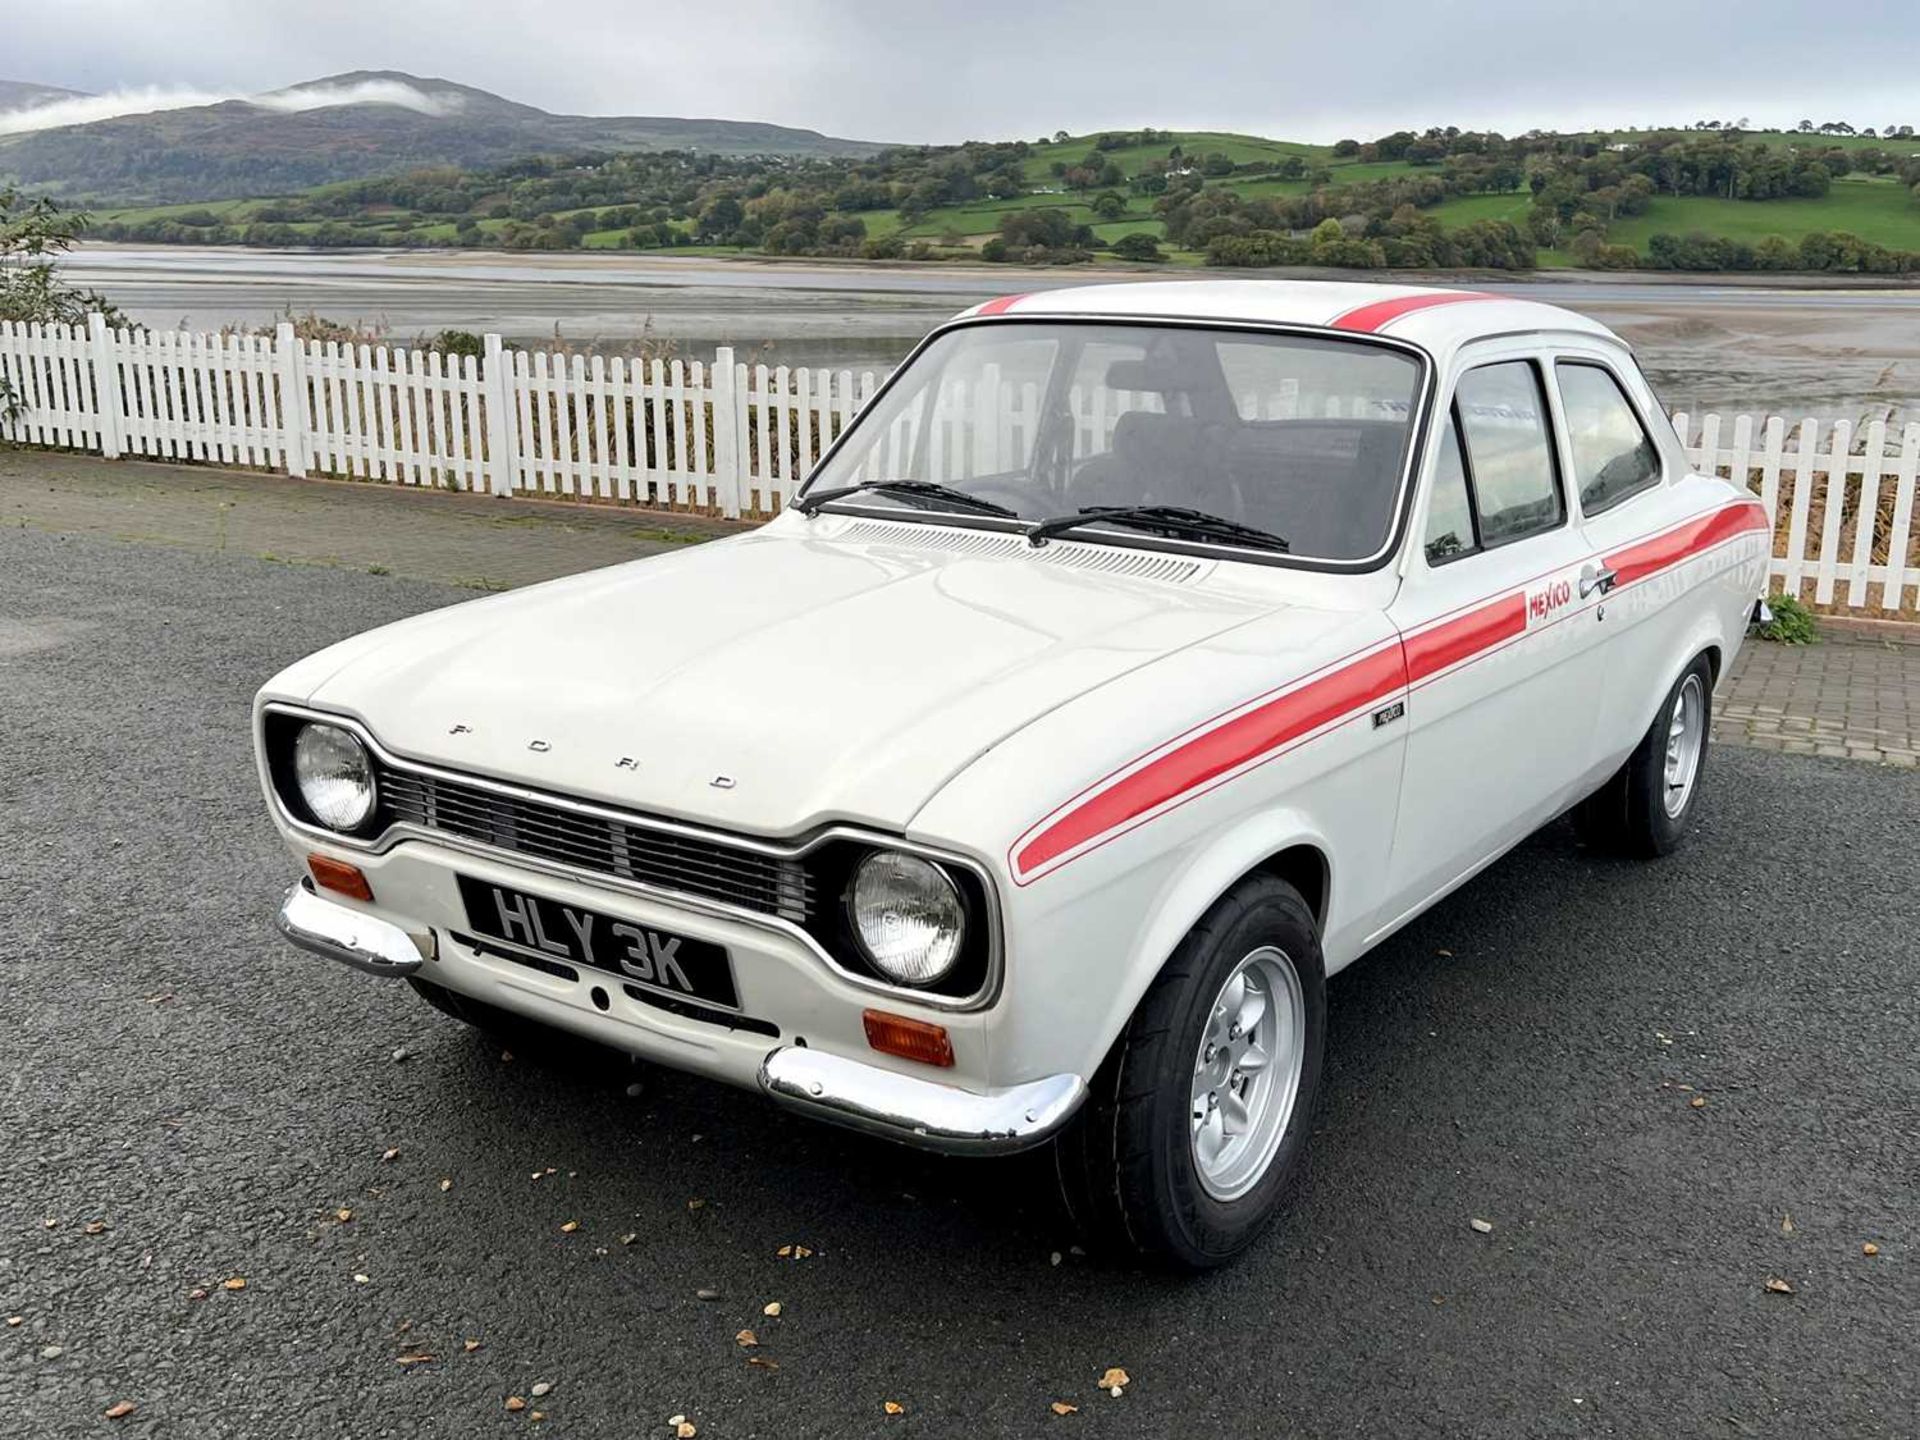 1971 Ford Escort Mexico with 2.1-litre Cosworth engine 2.1-Litre naturally aspirated Cosworth engine - Image 4 of 55